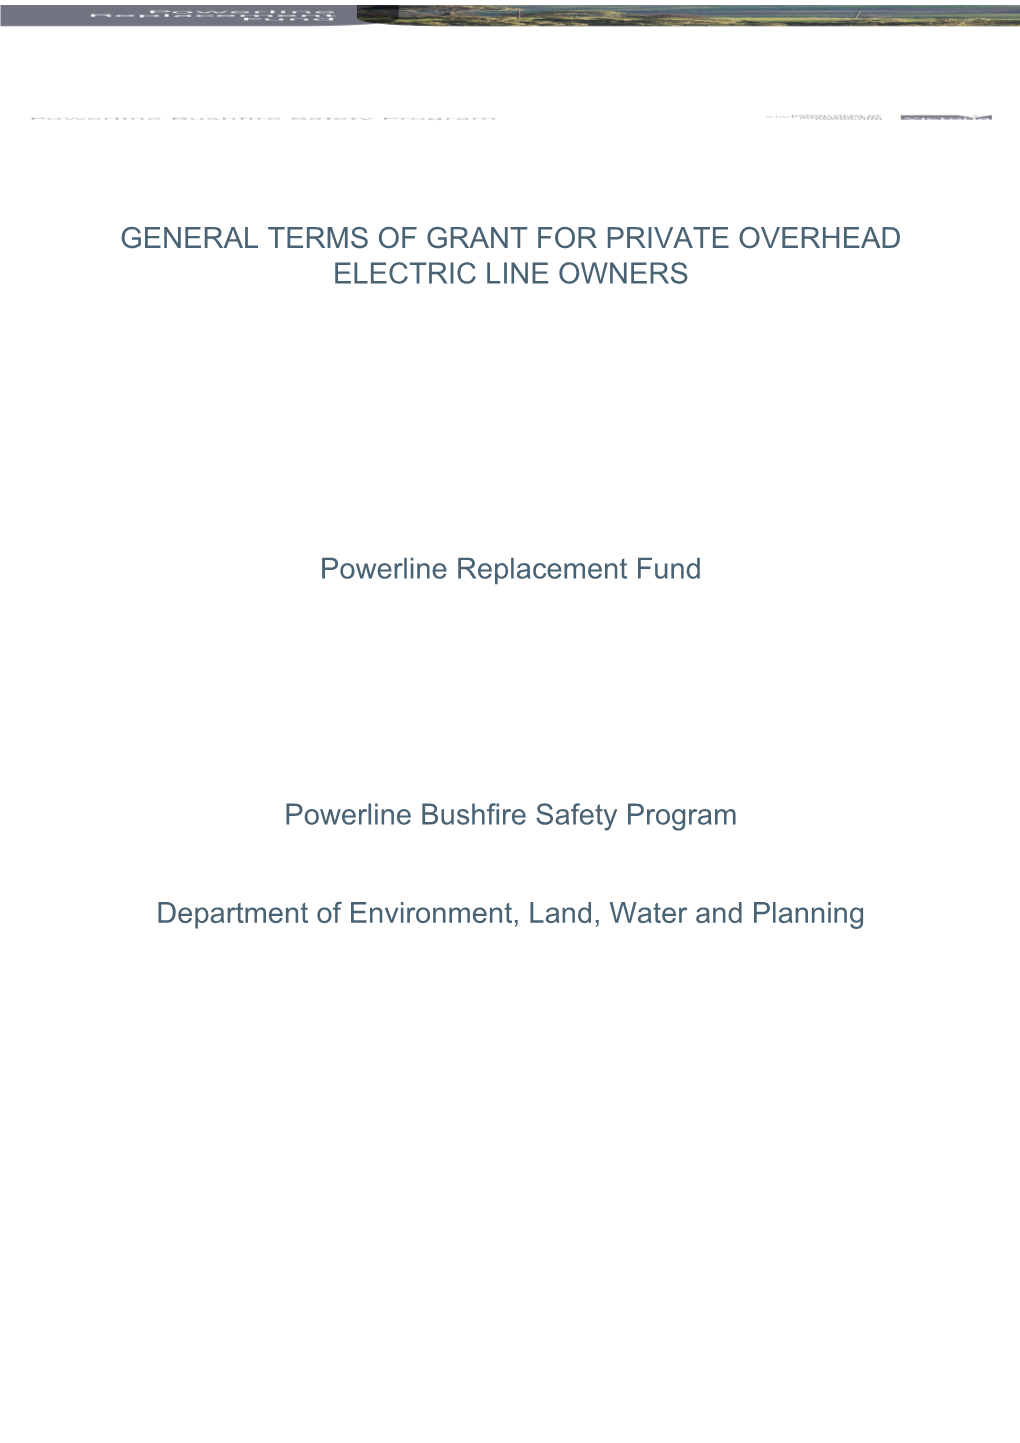 General Terms of Grant for Private Overhead Electric Line Owners